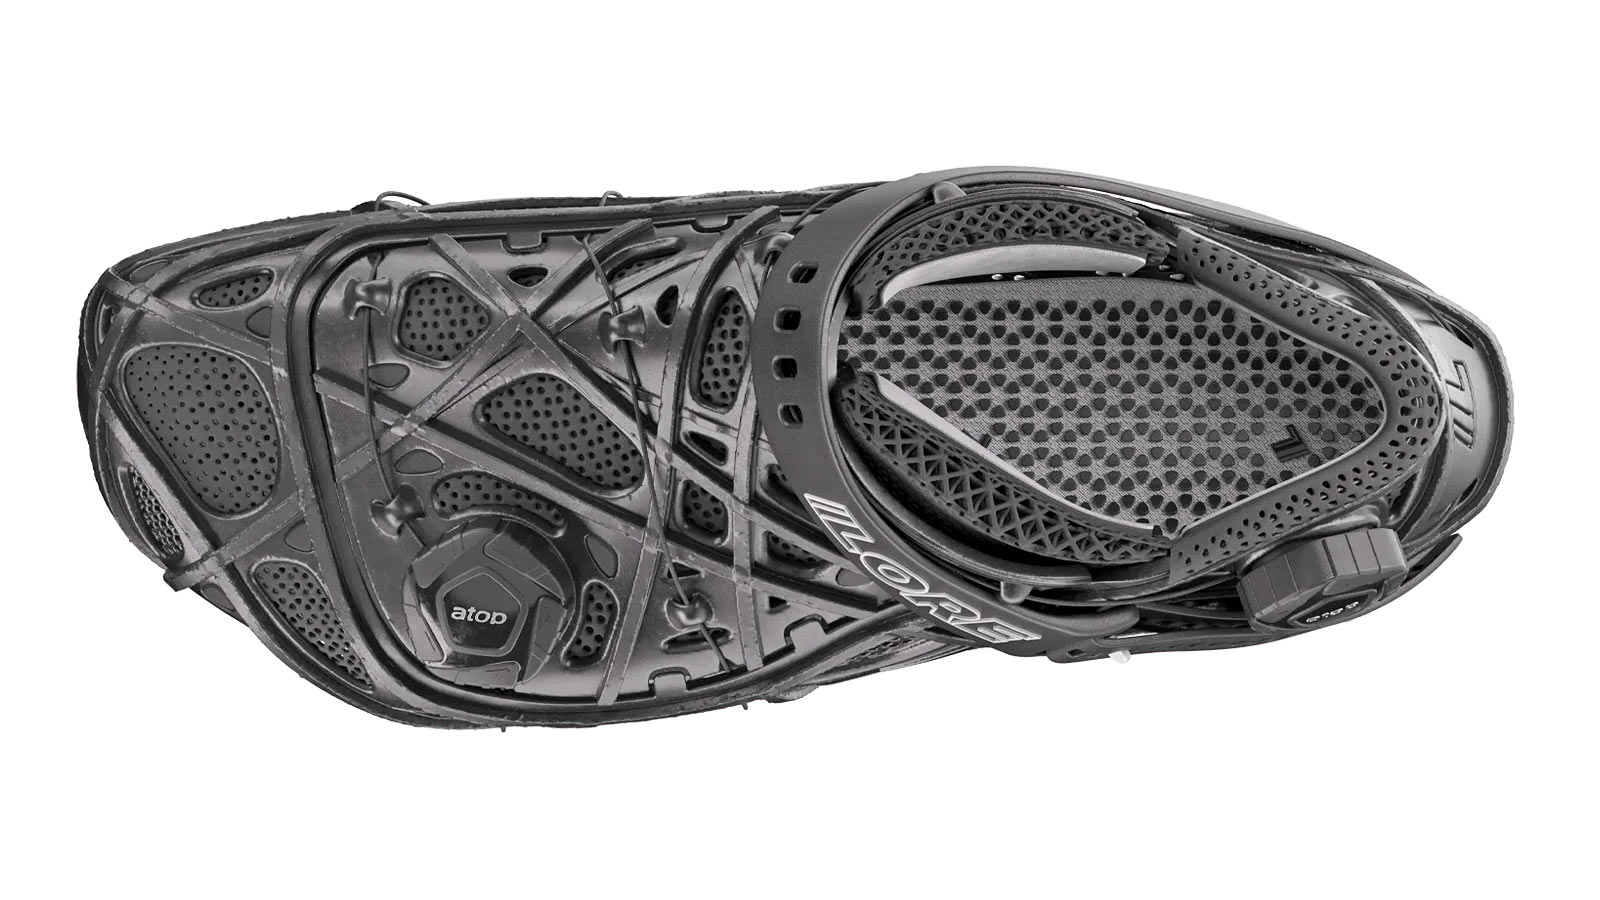 LoreOne 3D-printed custom carbon road shoes, new Atop Boa-like dials